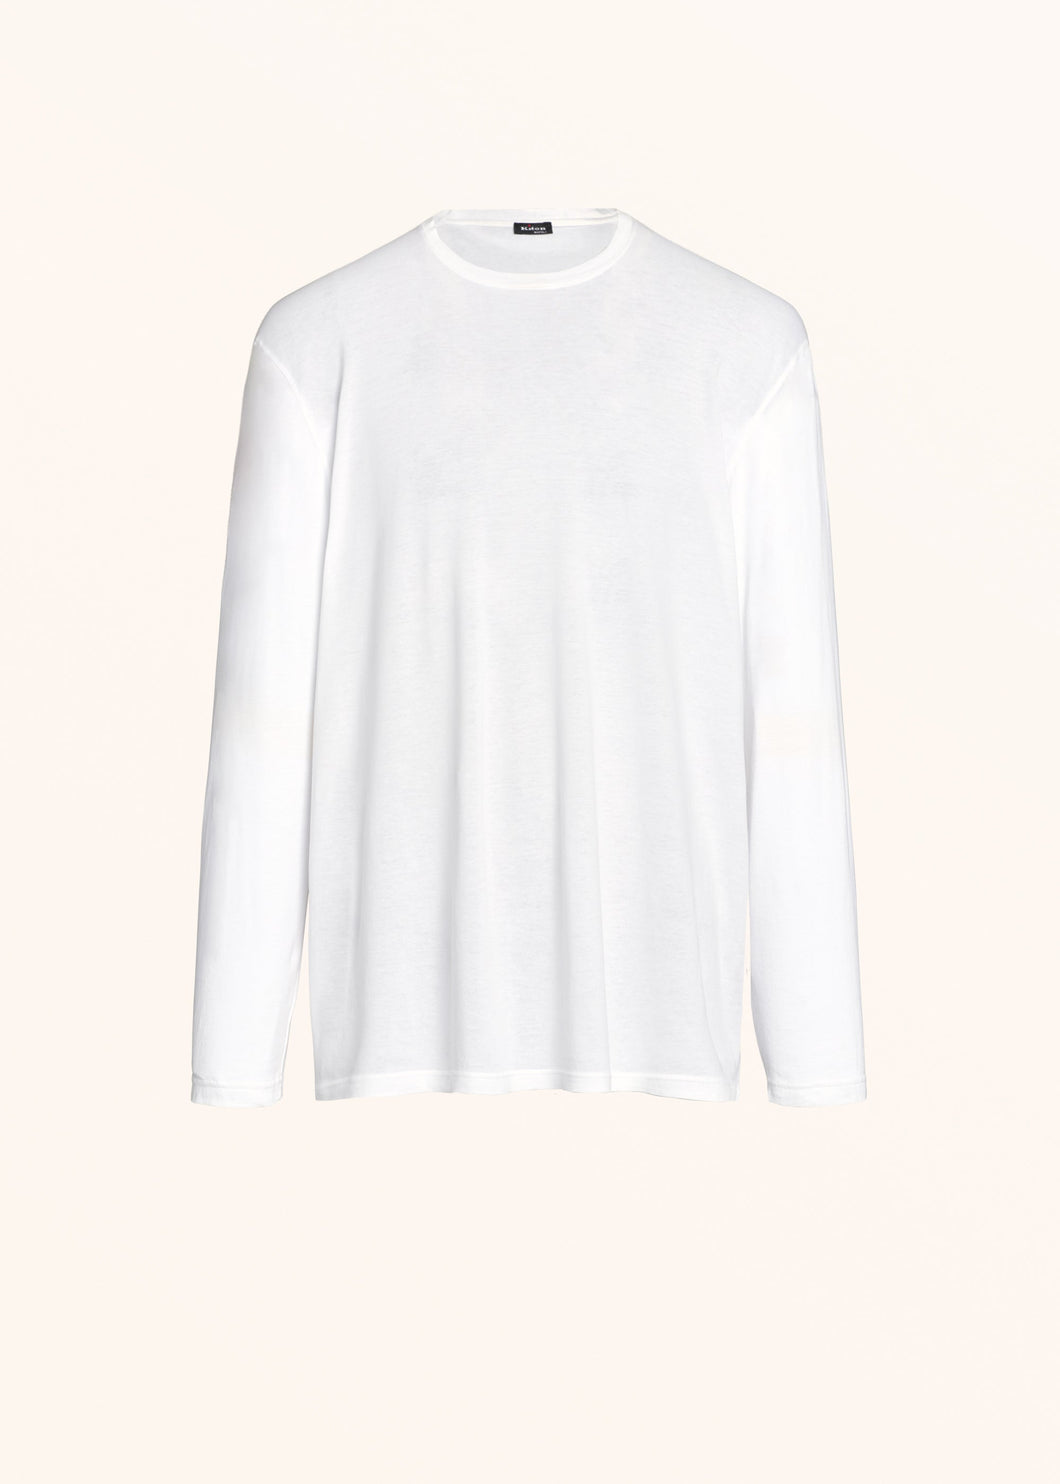 Kiton t-shirt l/s for man, made of cotton